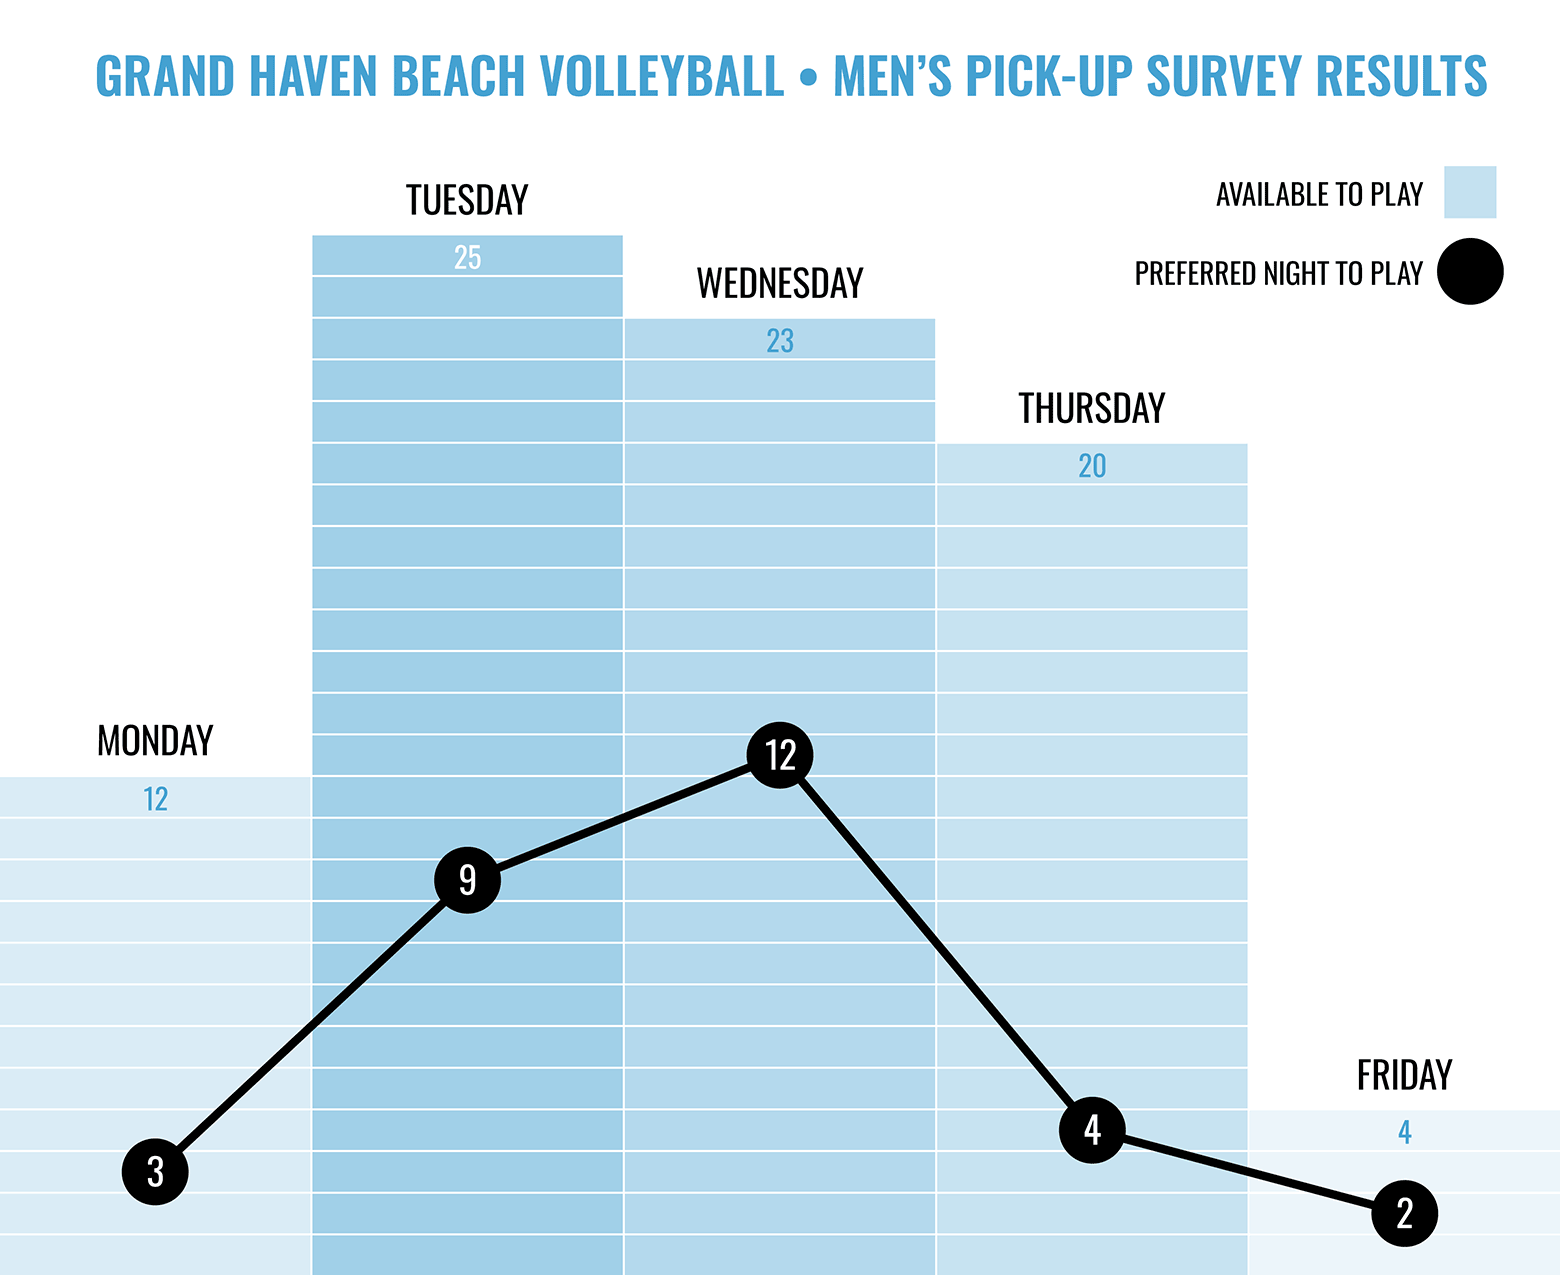 2017 Grand Haven Beach Volleyball : Men’s Pick-up Survey Results